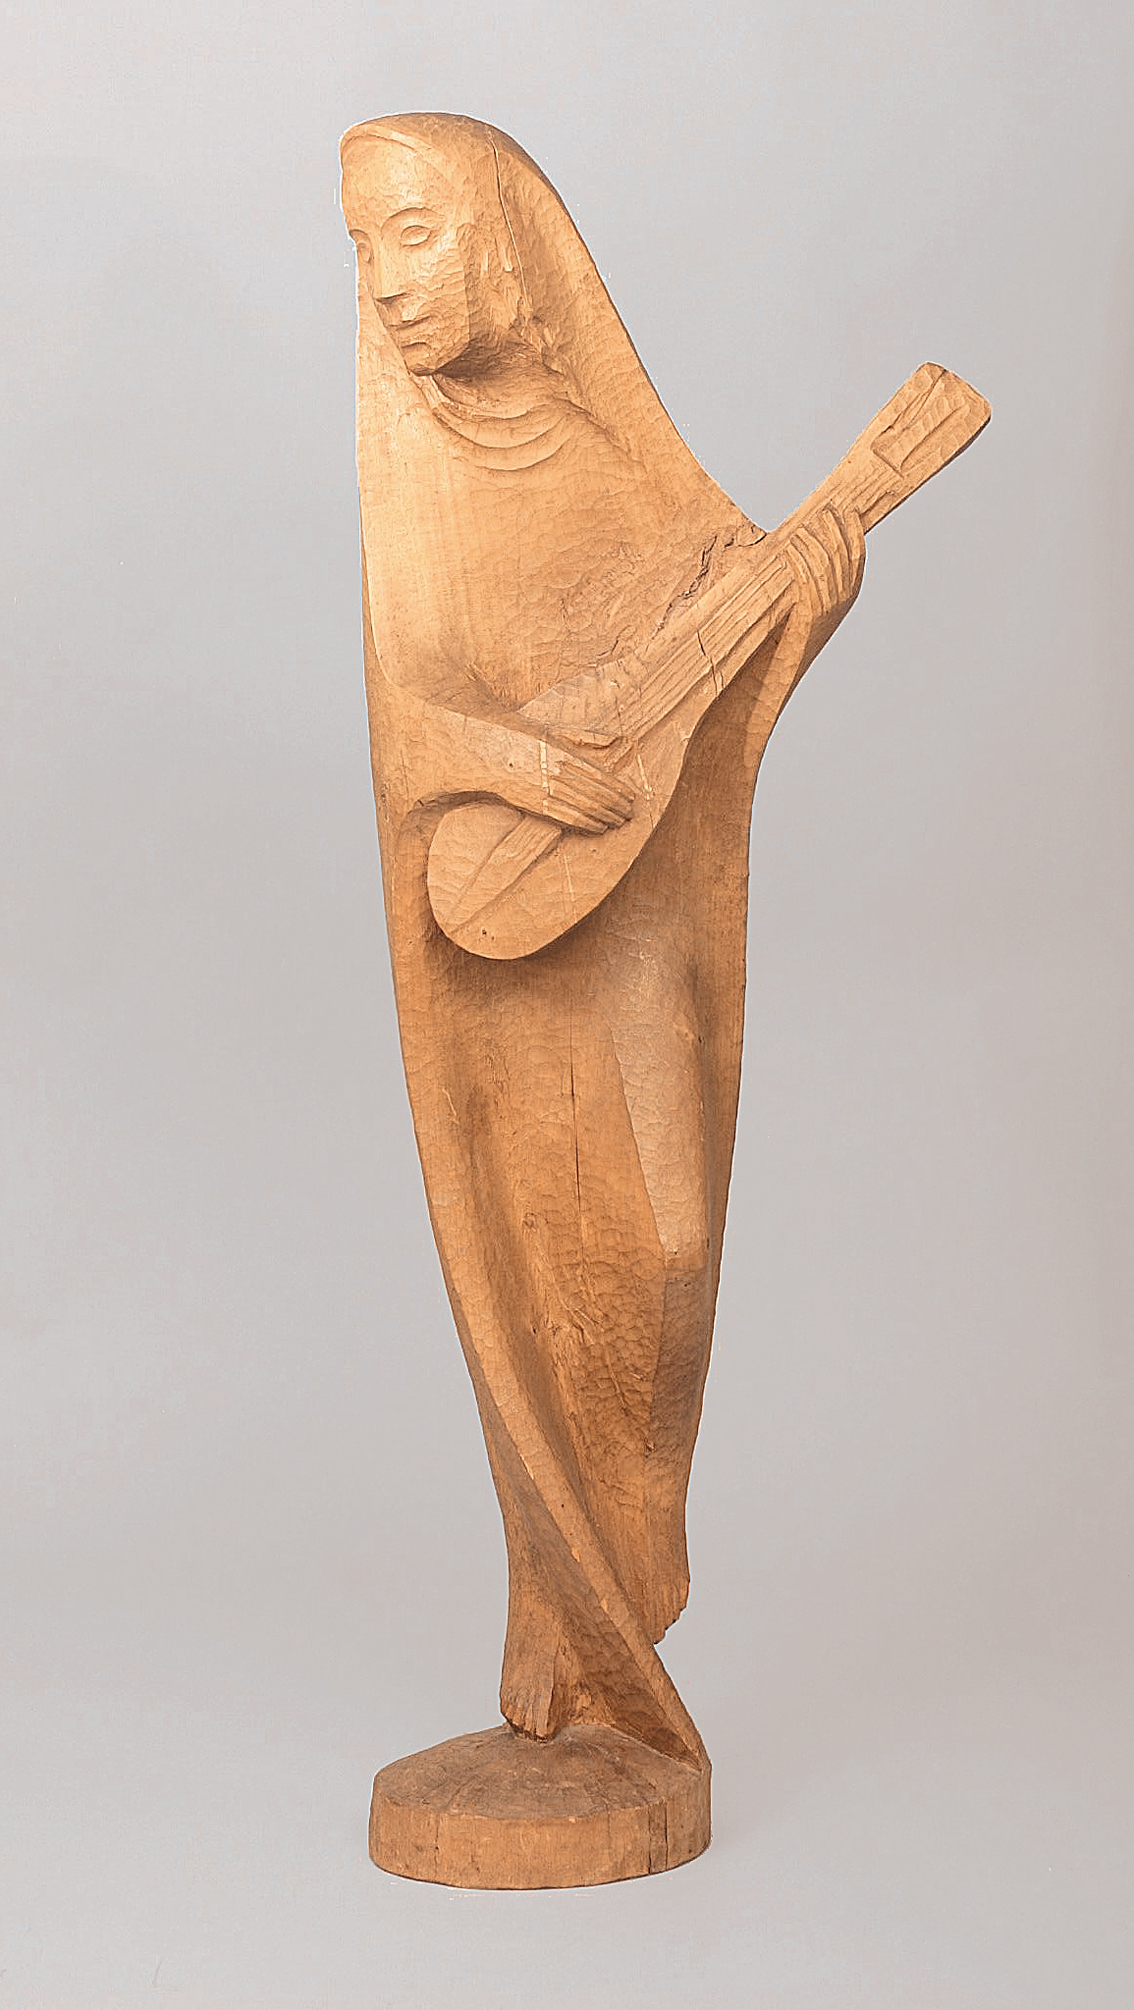 A wooden sculpture of a woman playing the mandolin